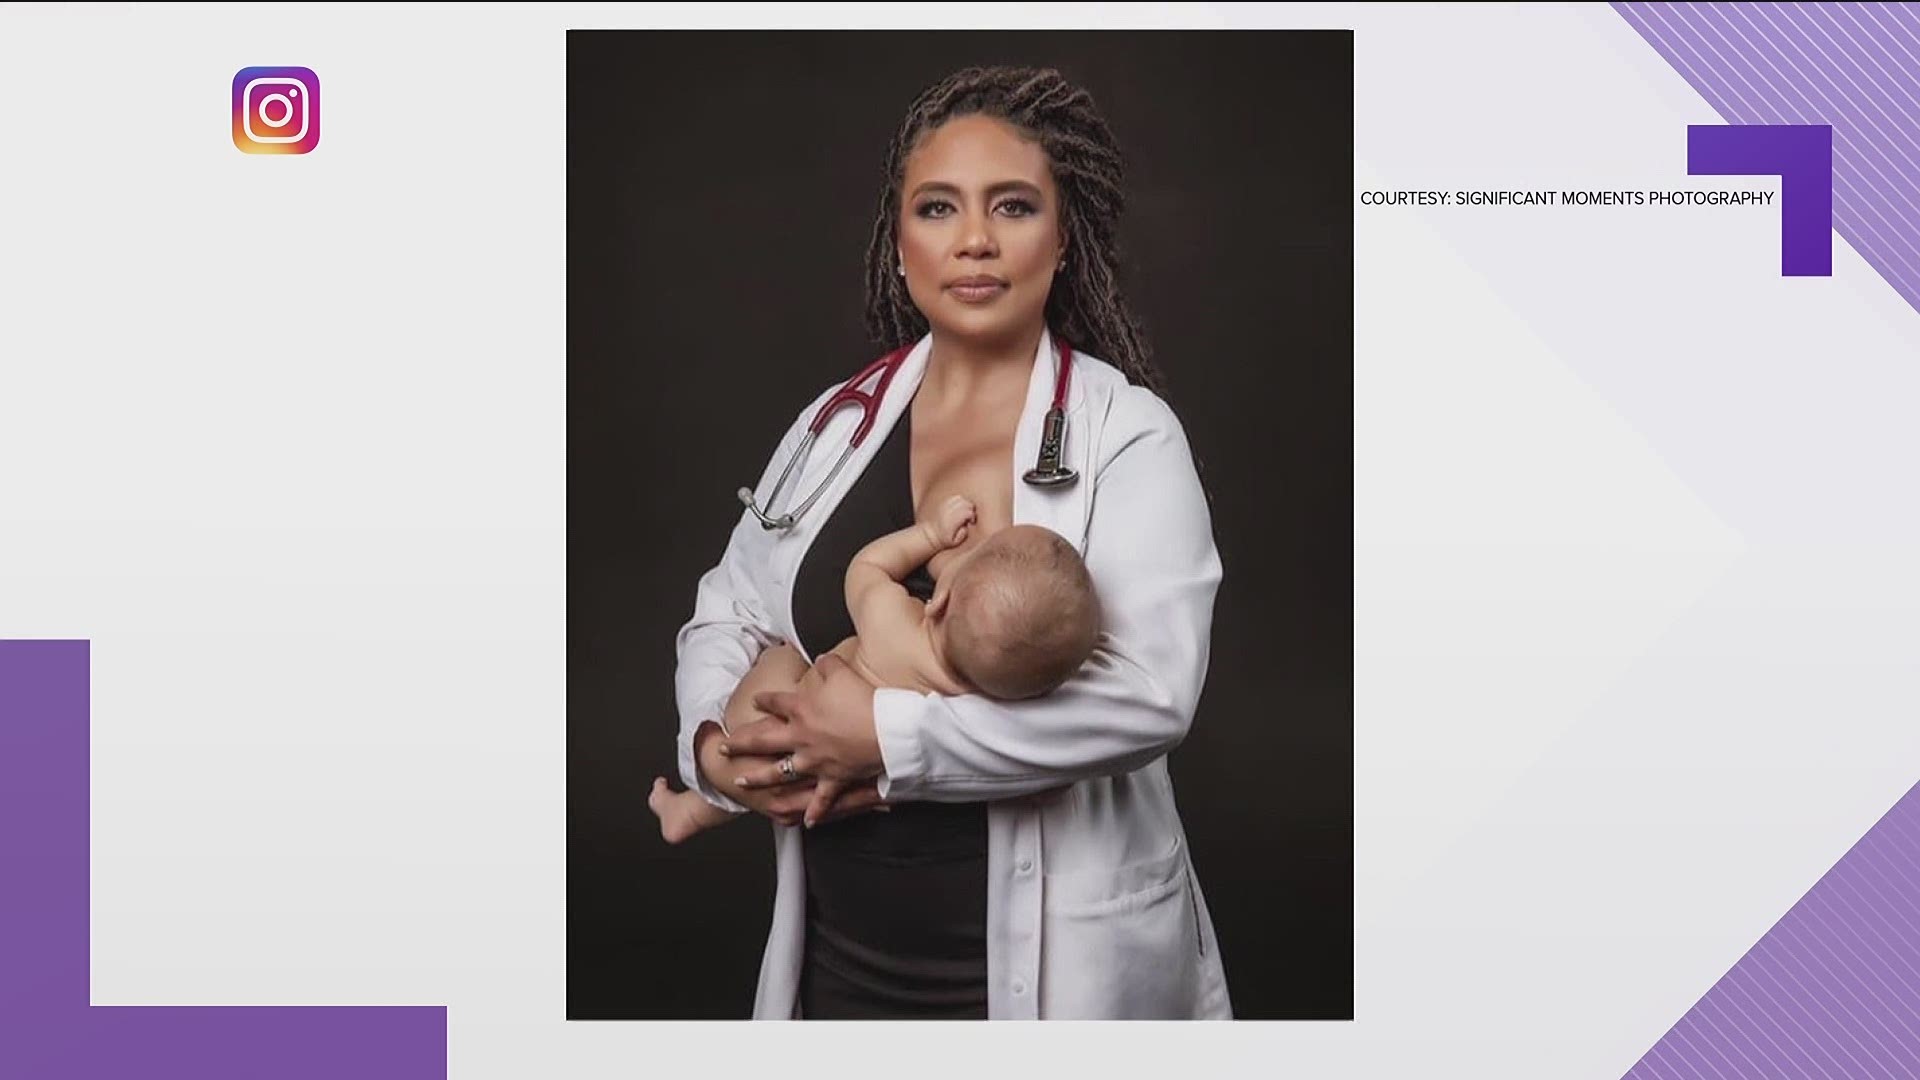 A beautiful photograph of an ER doctor breastfeeding her daughter is going viral during the COVID-19 crisis.